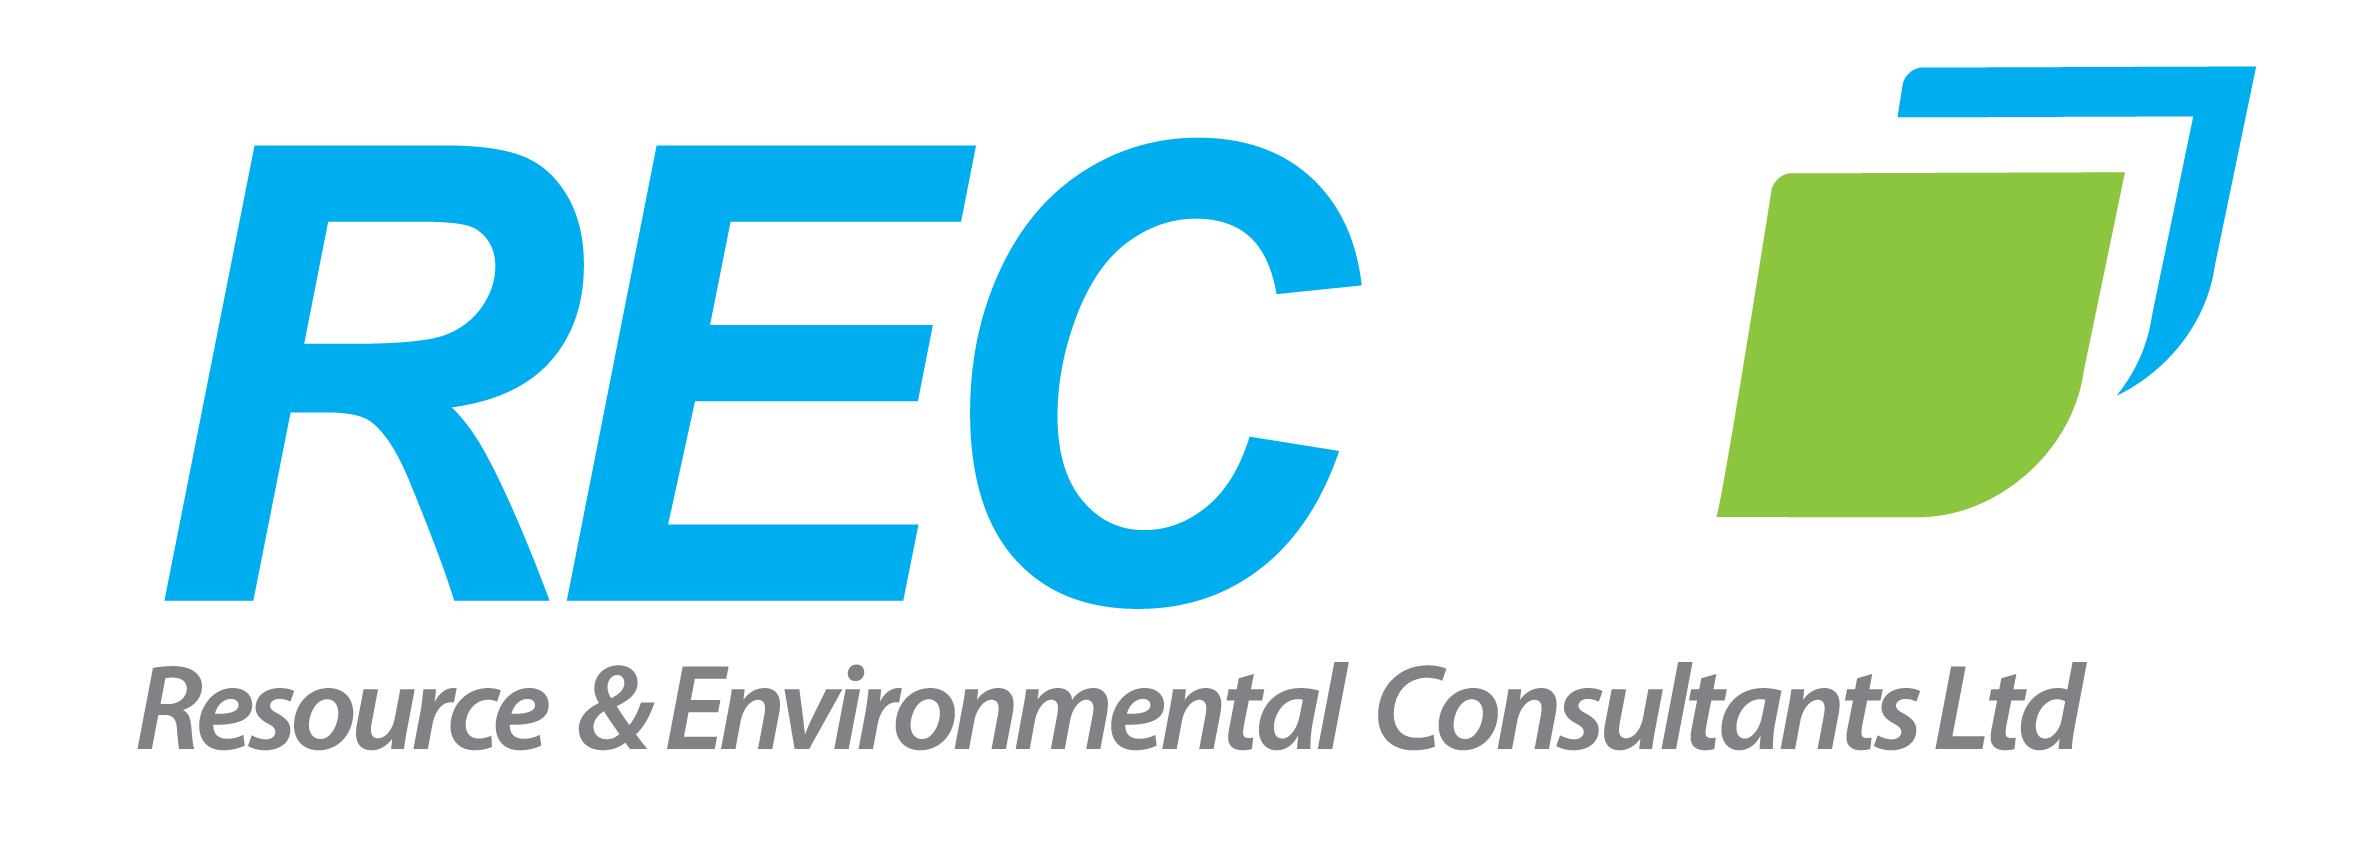 Resource and Environmental Consultants Ltd